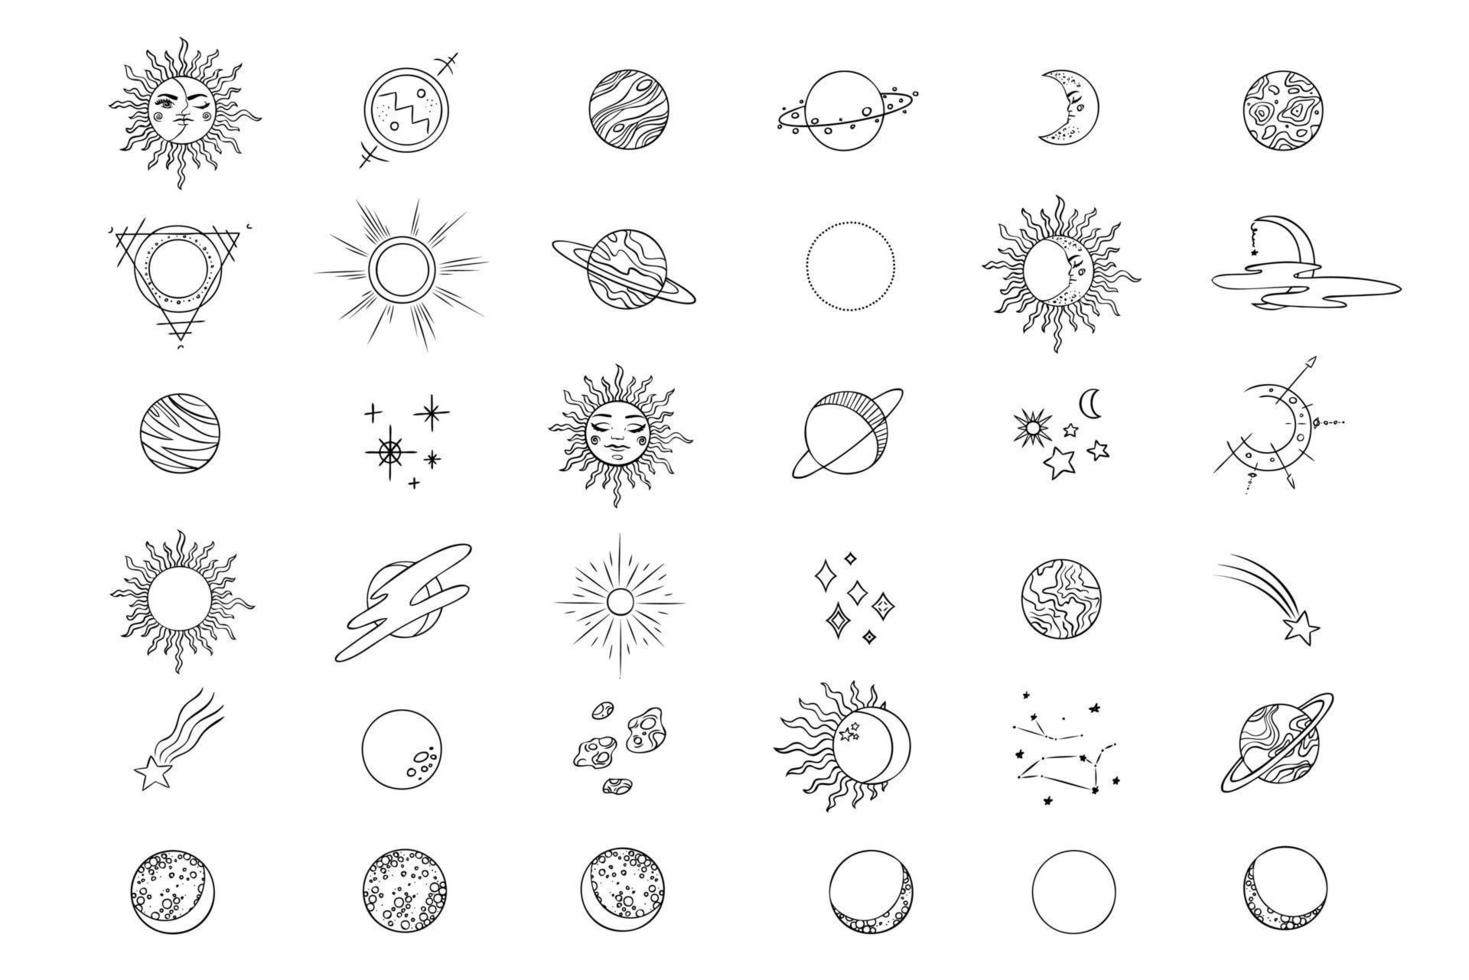 Esoteric symbols with the moon and the sun. Celestial signs. Vector illustration in hand drawn style